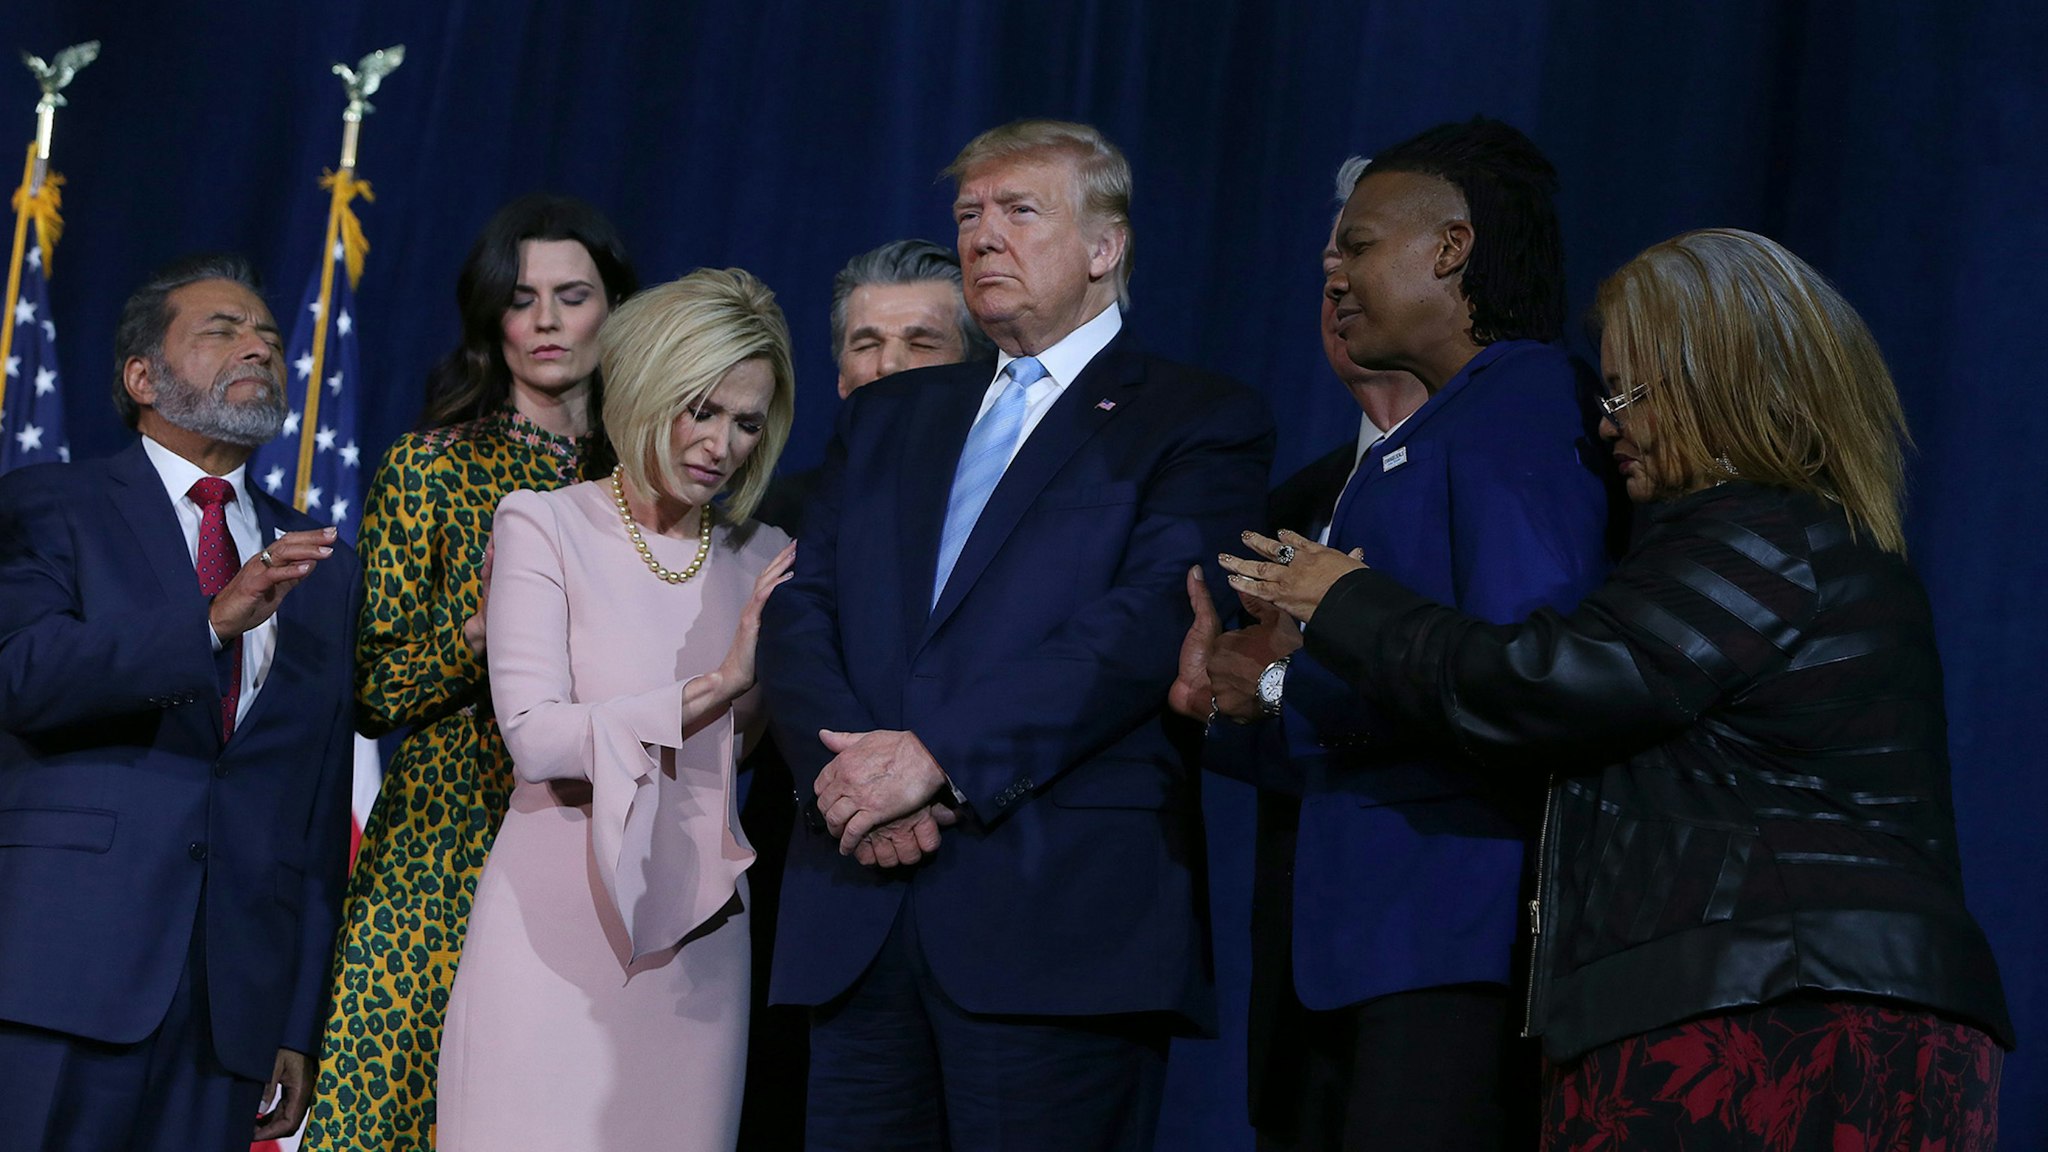 A group of religious leaders pray for President Donald Trump during an "Evangelicals for Trump" campaign rally at El Rey Jesus Evangelical church in Kendall, Fla., on Friday, Jan. 3, 2020.